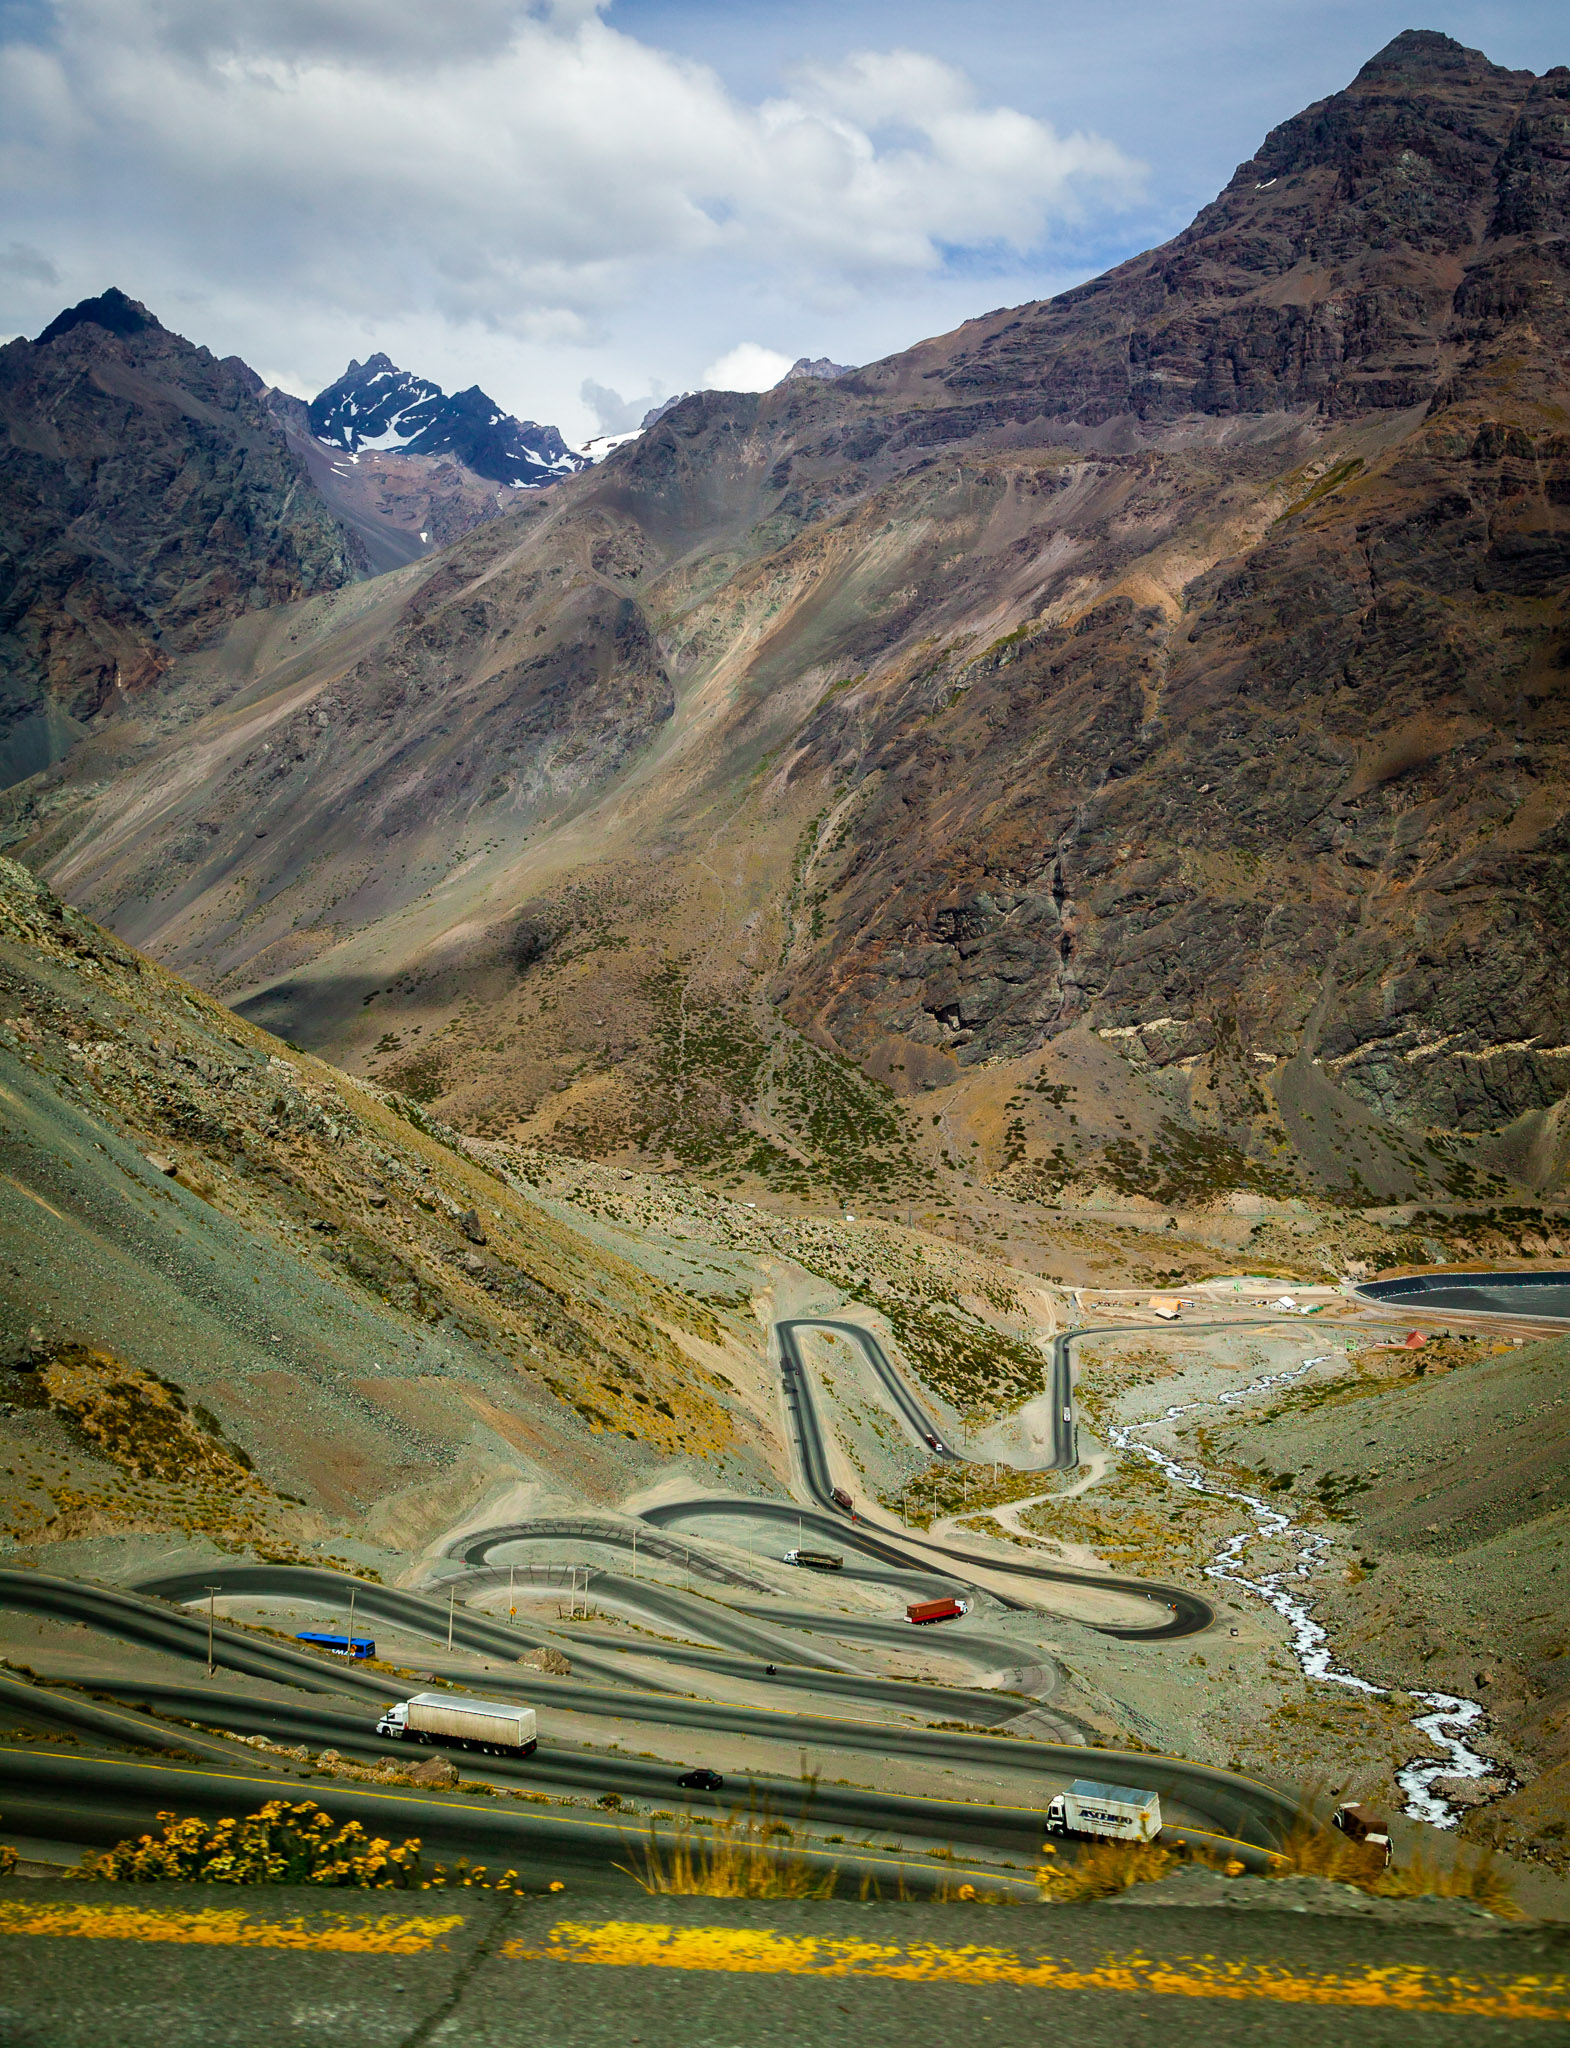 Switchbacks up to Portillo ski resort & pass in Andes